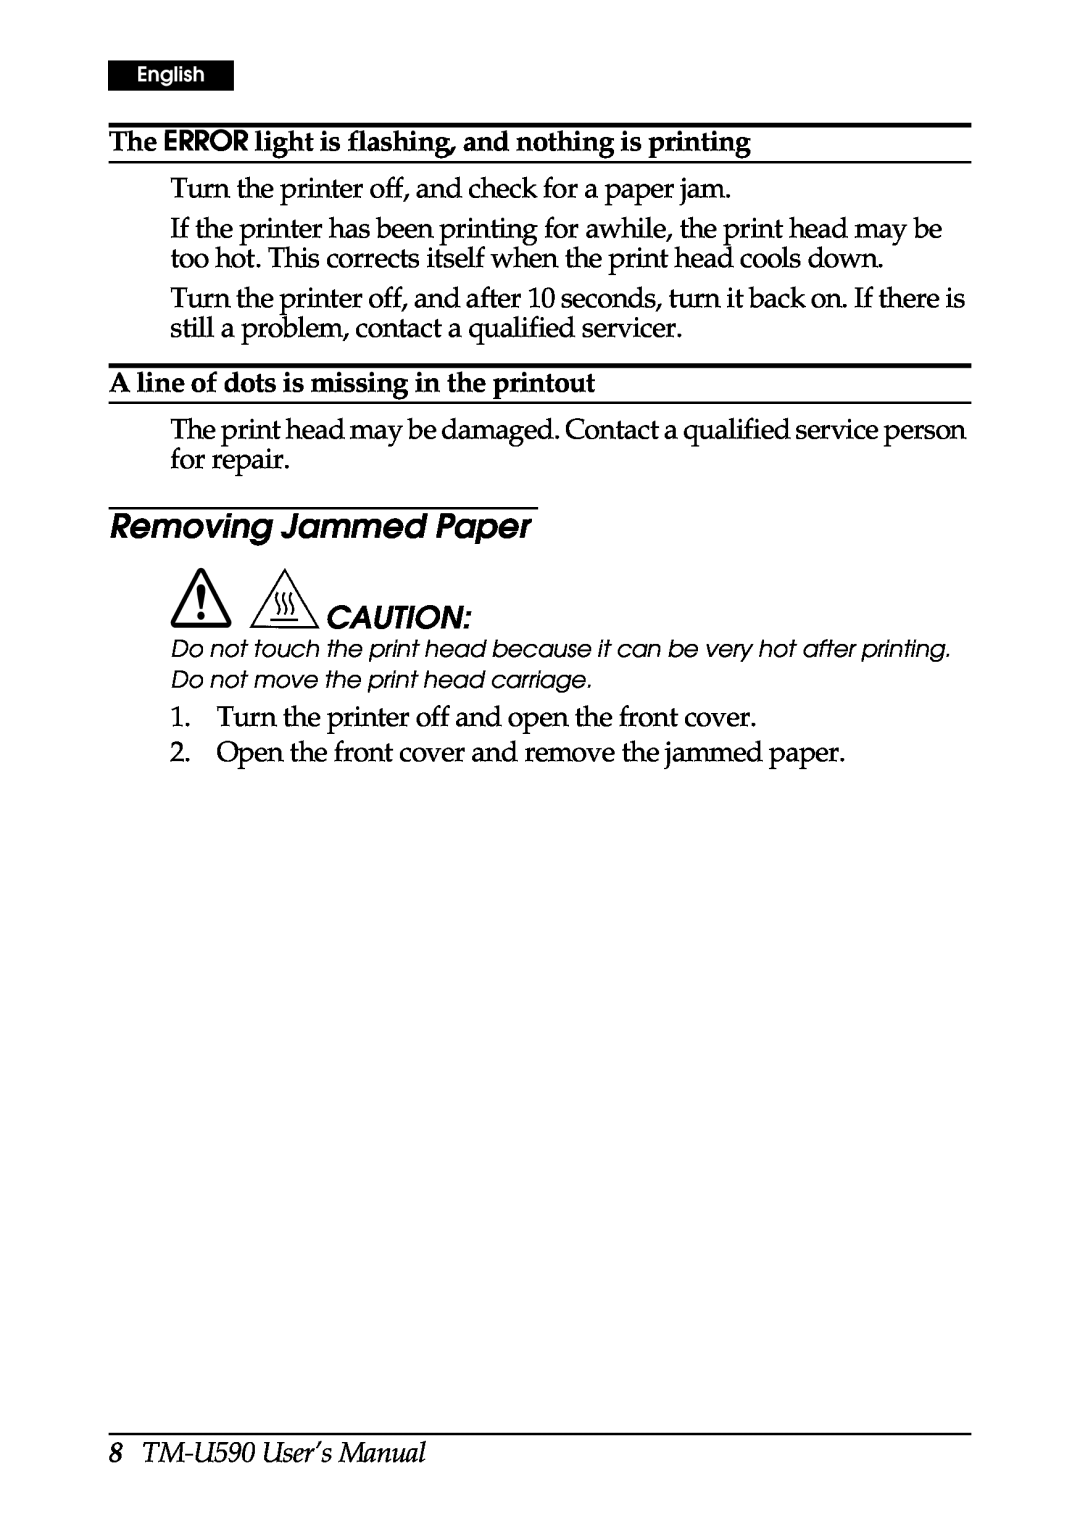 FARGO electronic TM-U590 user manual Removing Jammed Paper, The ERROR light is flashing, and nothing is printing 